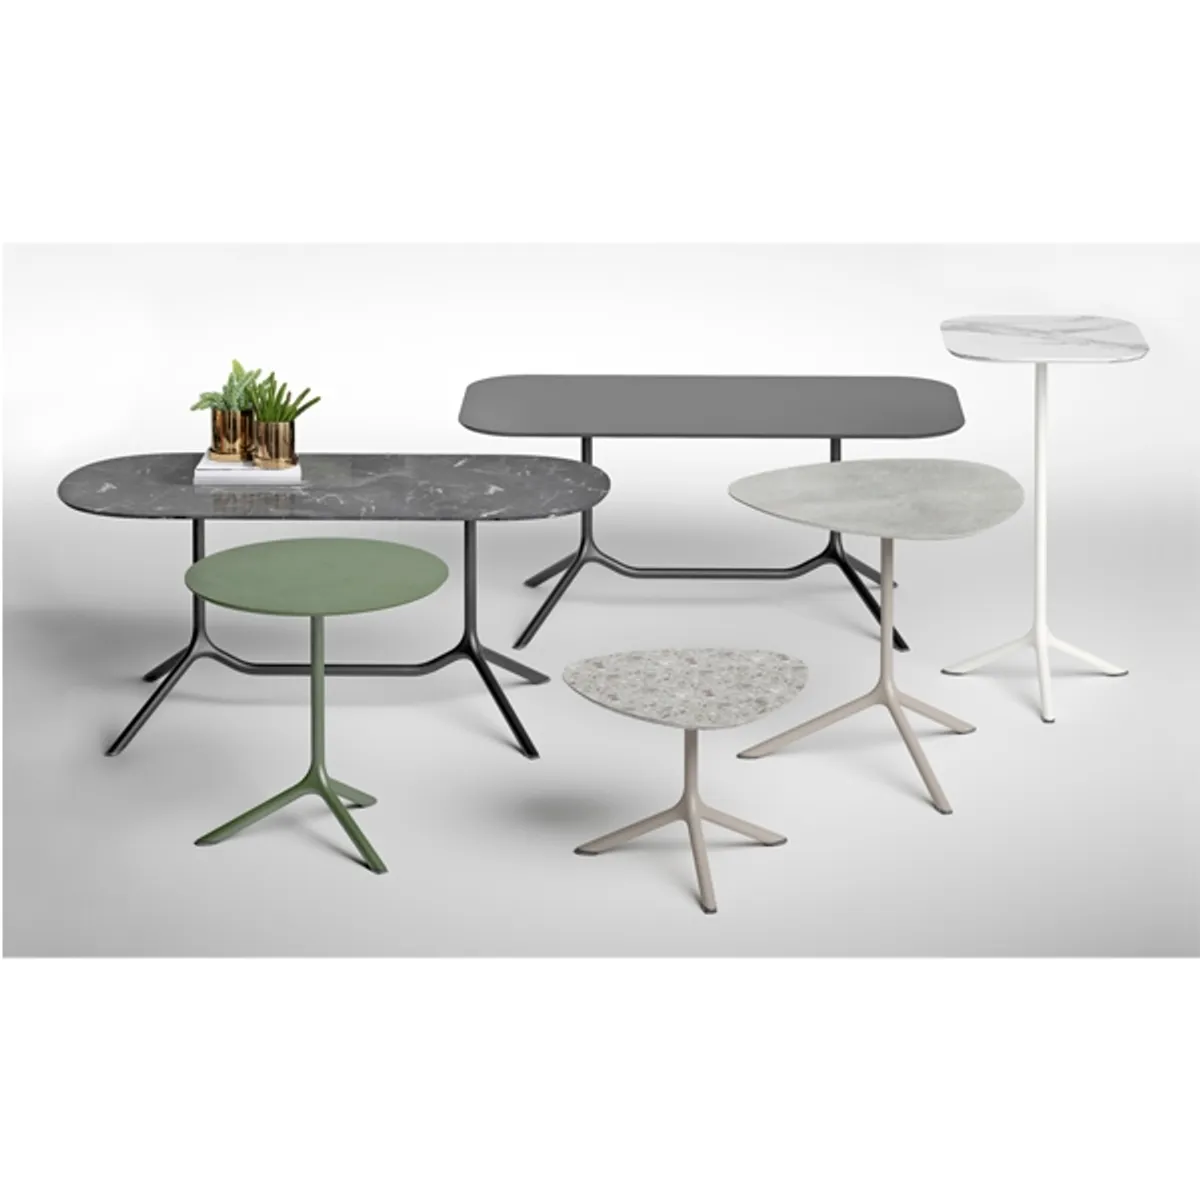 Trinette tables Inside Out Contracts